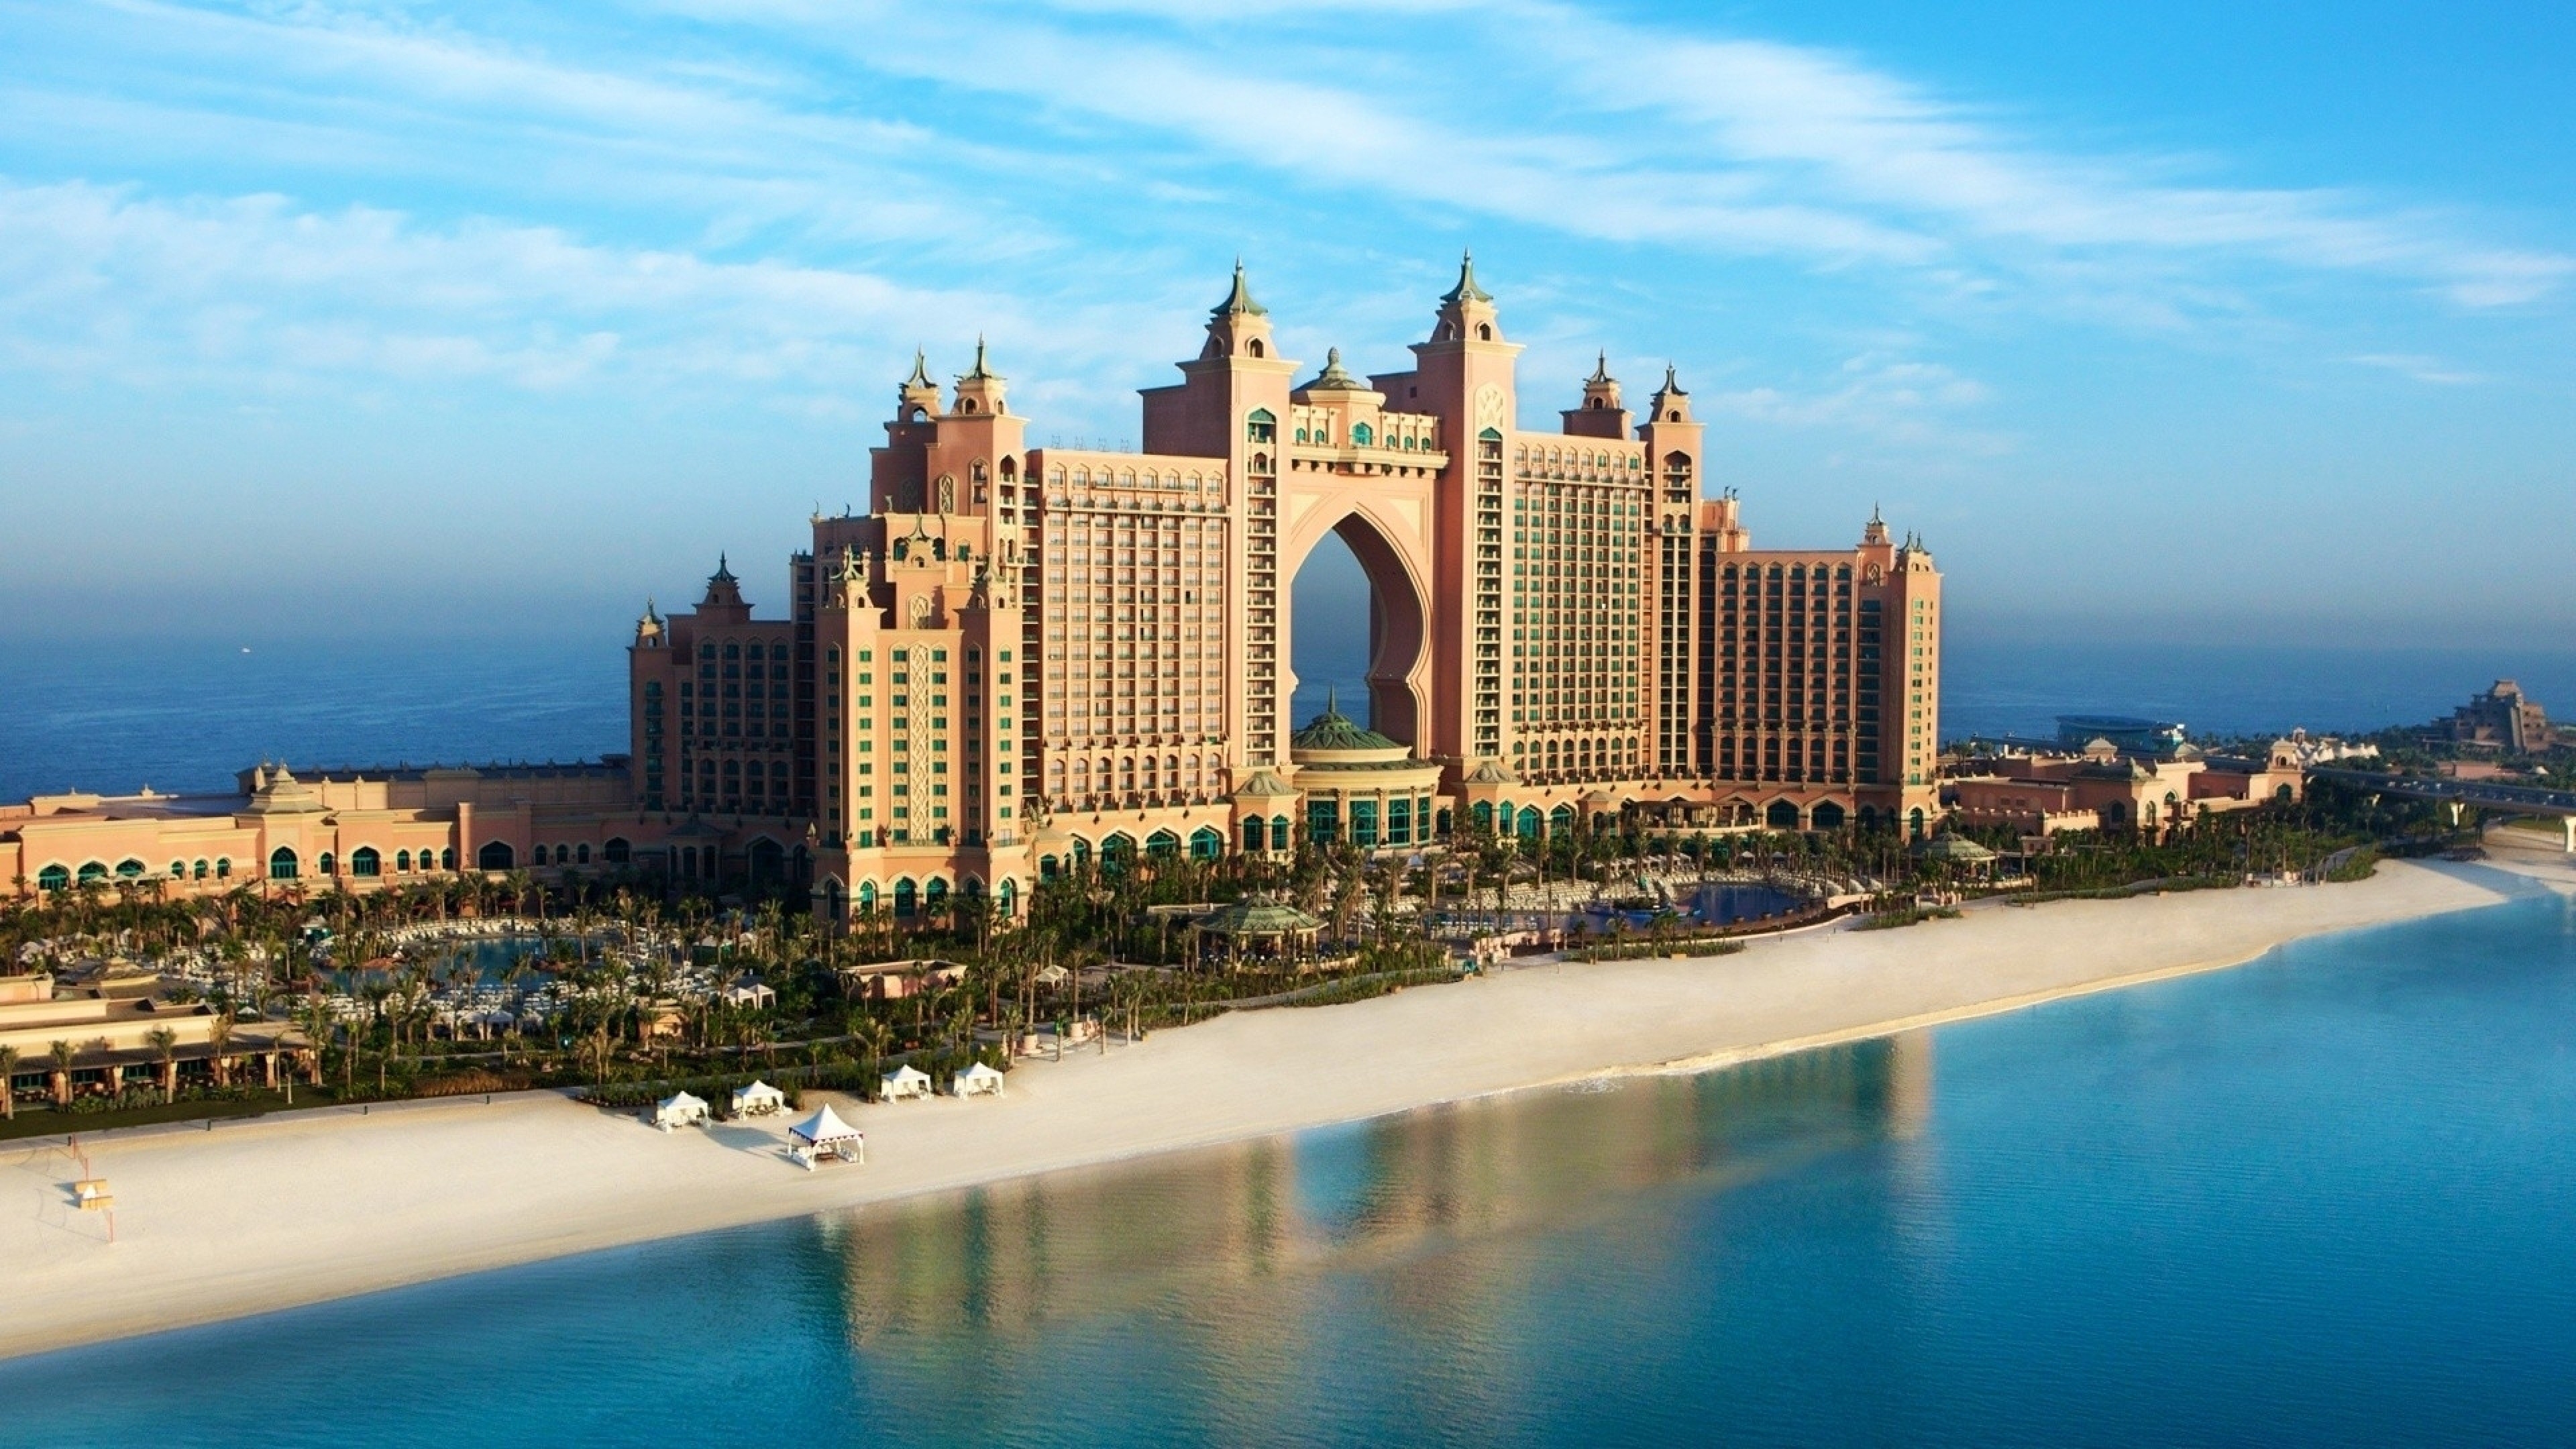 a large building with a large arch over a body of water with Atlantis, The Palm in the background